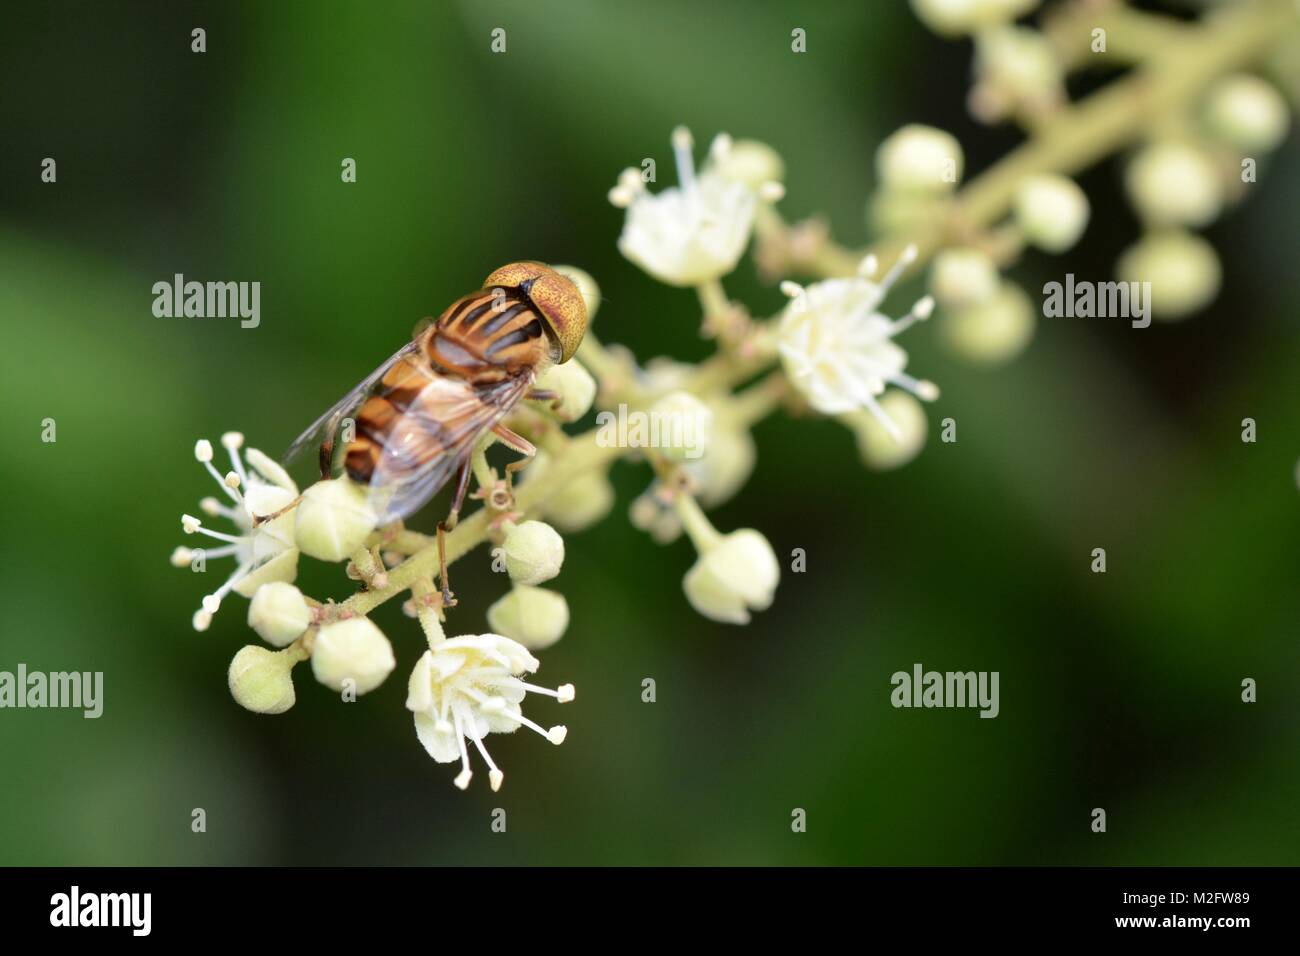 Tropical hoverfly Stock Photo